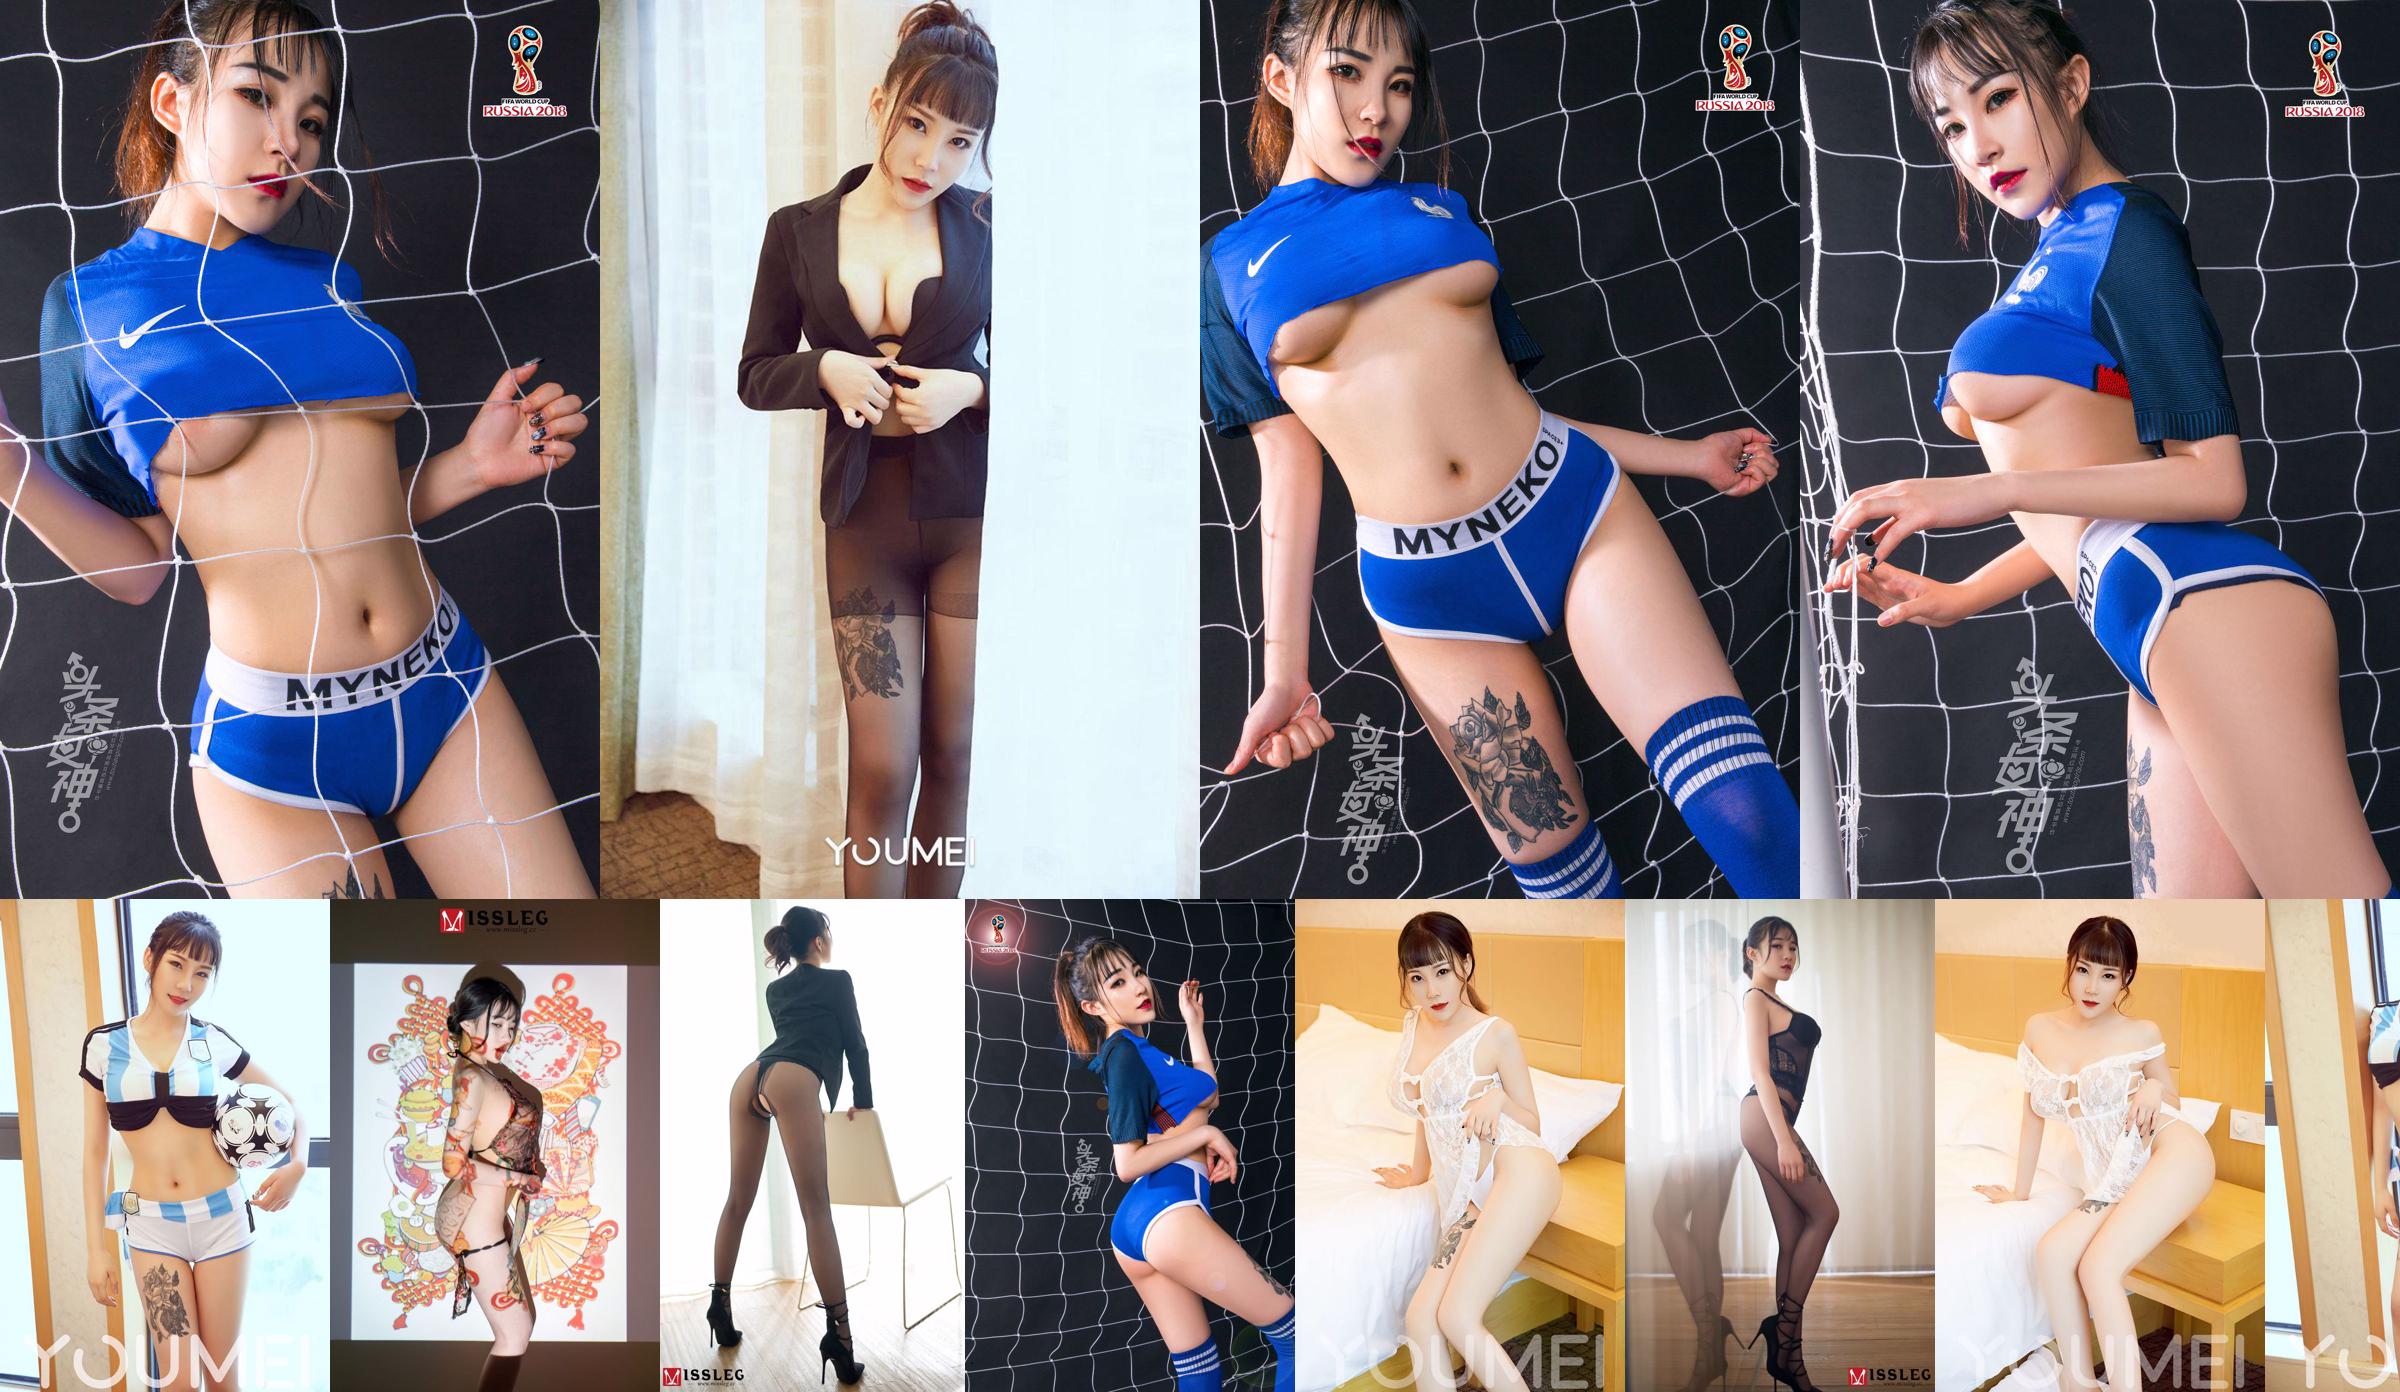 [IESS 奇思趣向] Model: Newcomer "Girls Who Love Laughter" No.401d9a Page 3